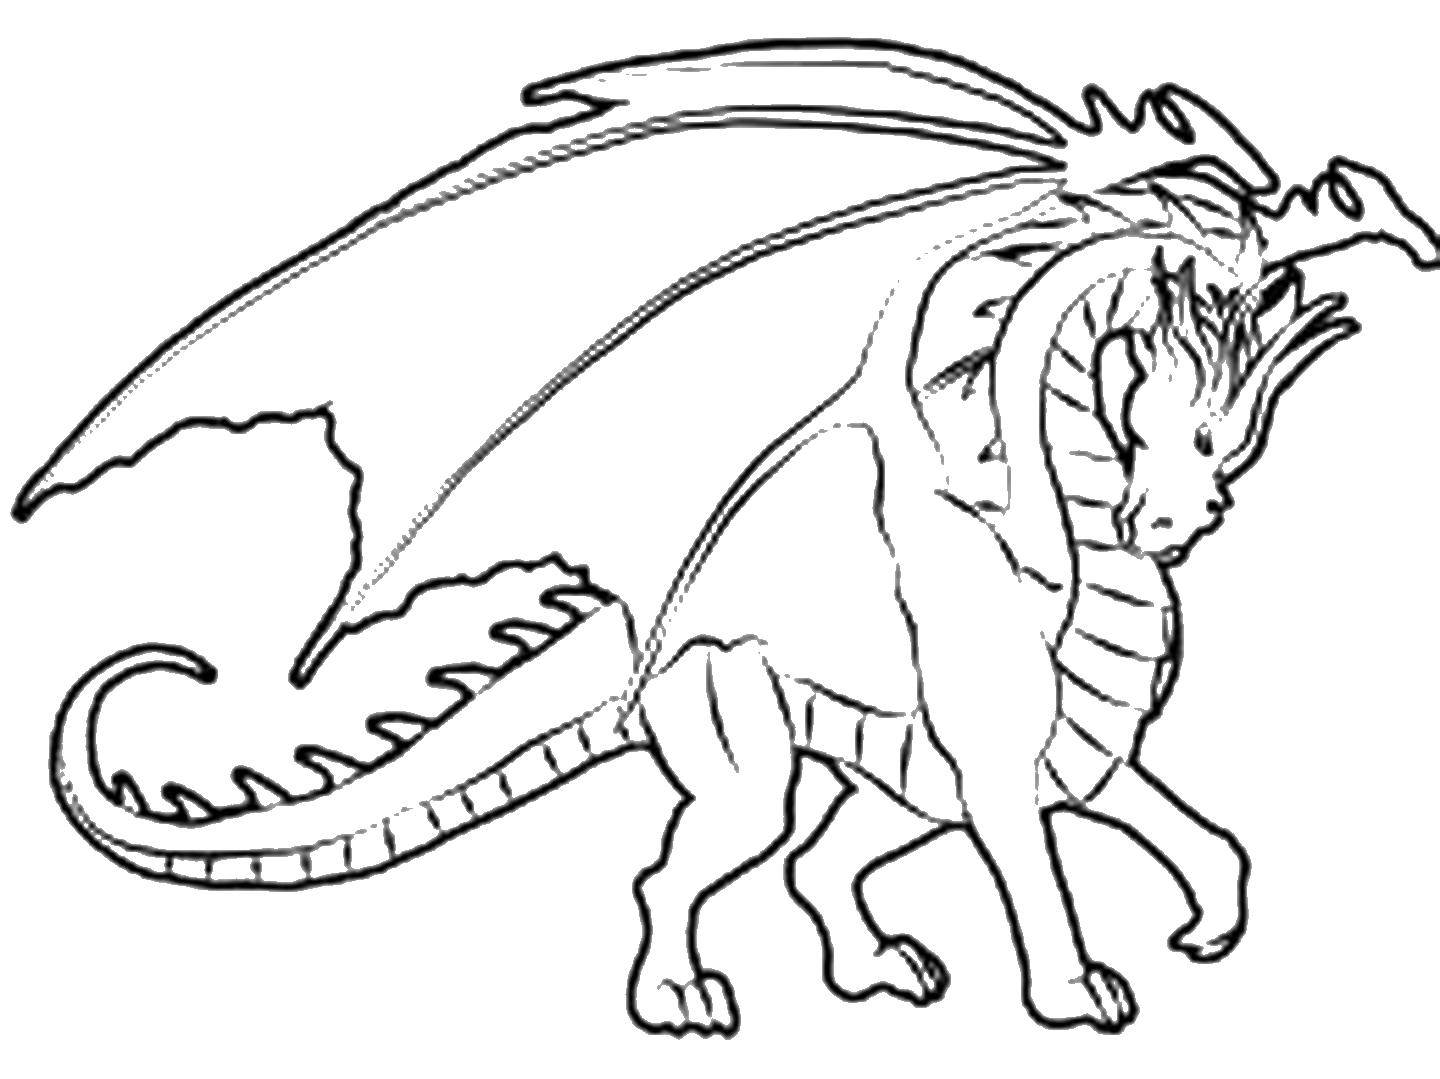 Coloring The winged dragon. Category Dragons. Tags:  dragons, winged dragon.